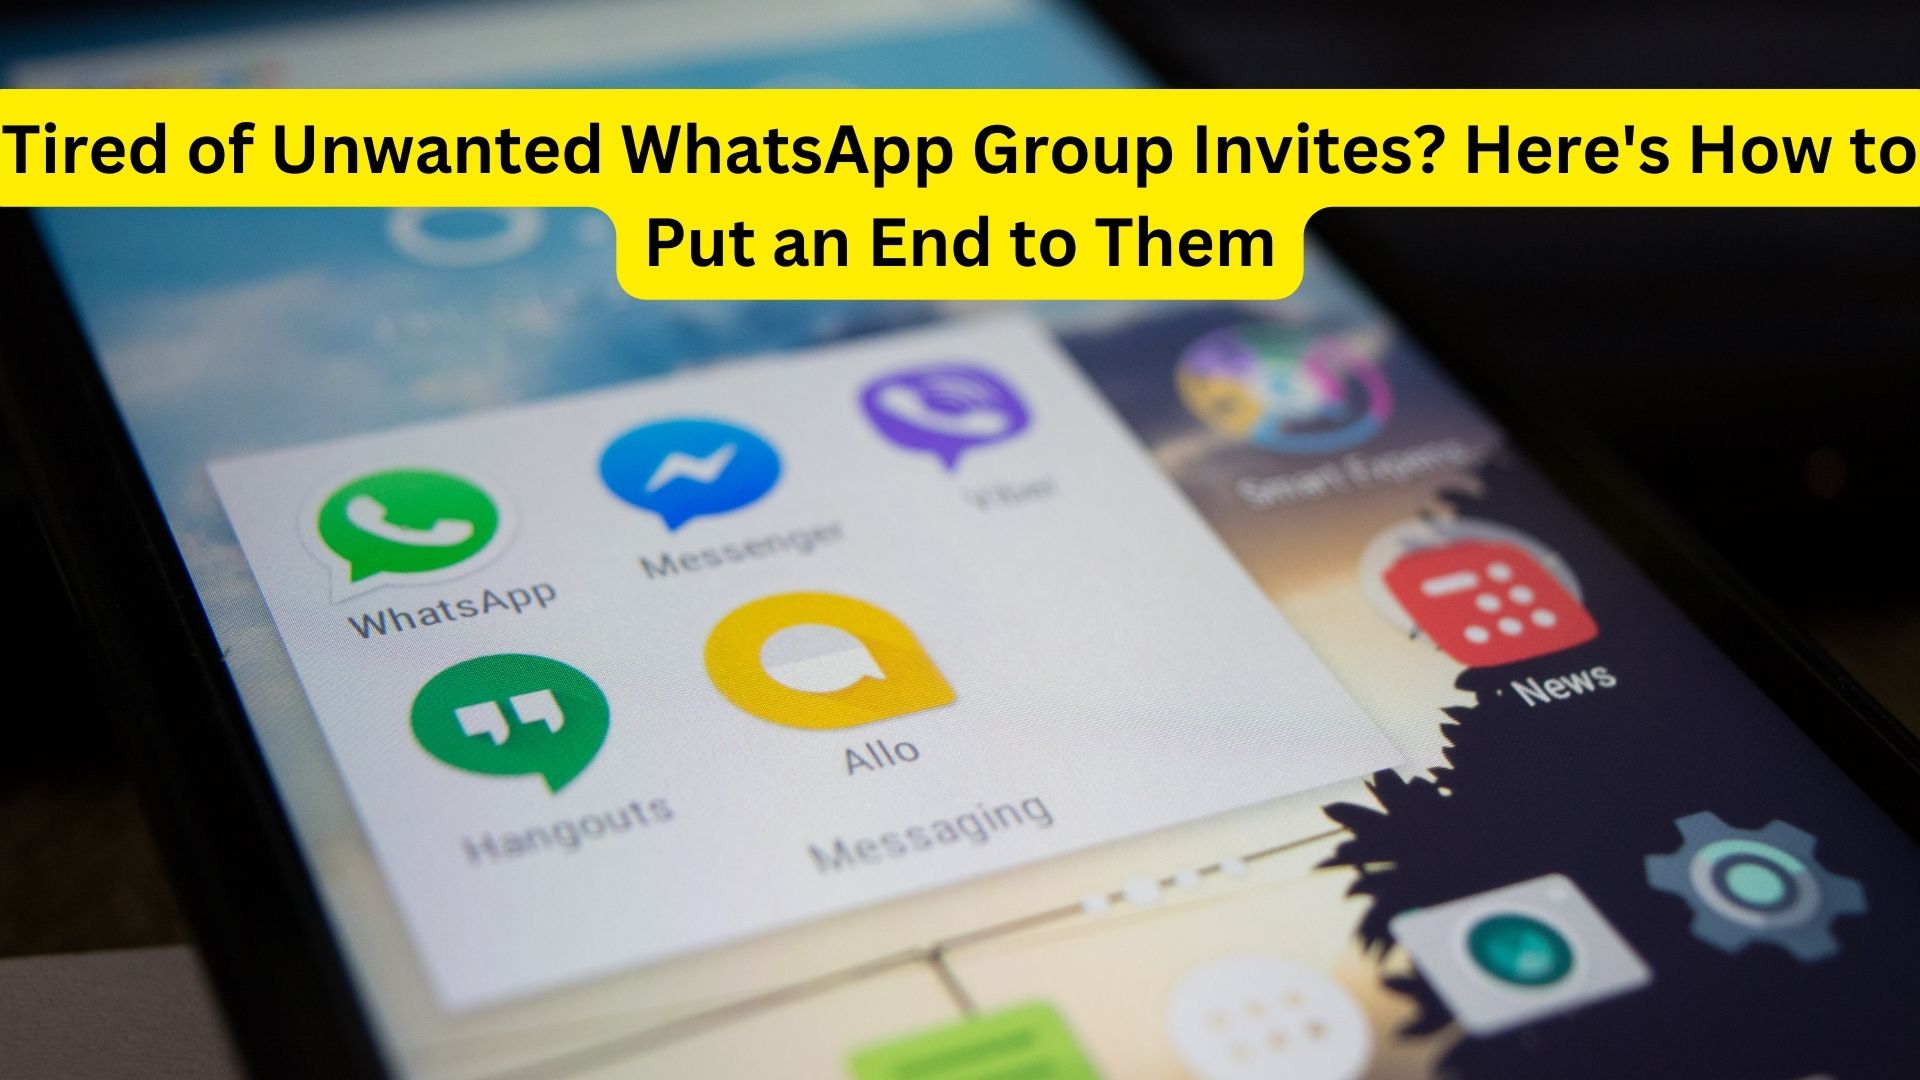 Tired of Unwanted WhatsApp Group Invites? Here's How to Put an End to Them